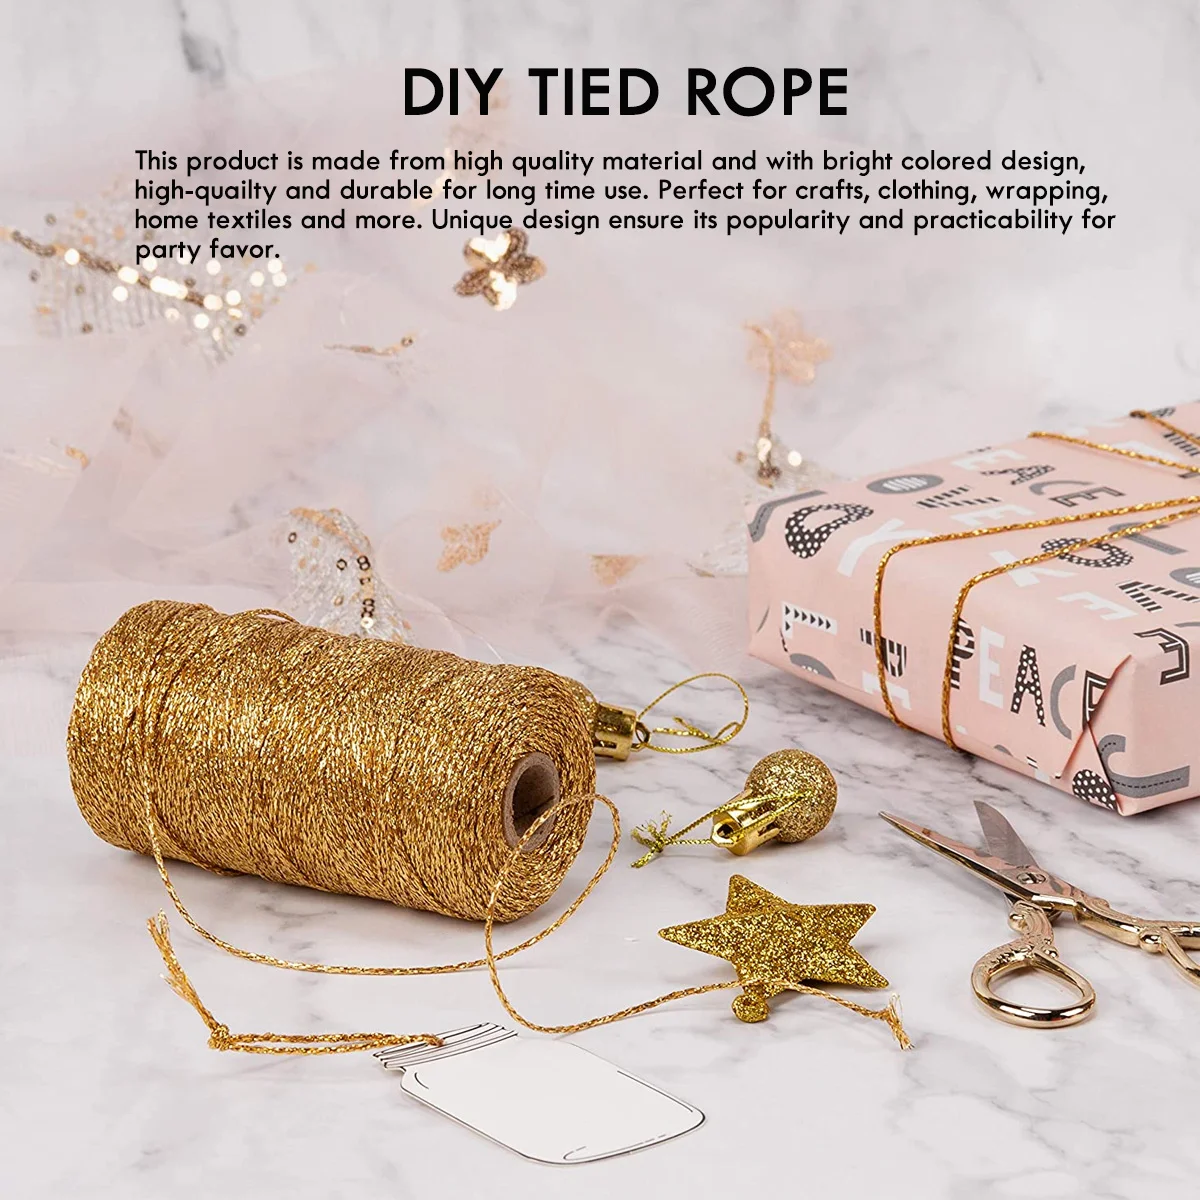 

Cotton Rope Hangers Decorate Decorative Wedding Cloth Party Decoration Thread Chic DIY Crafts Tied Jute